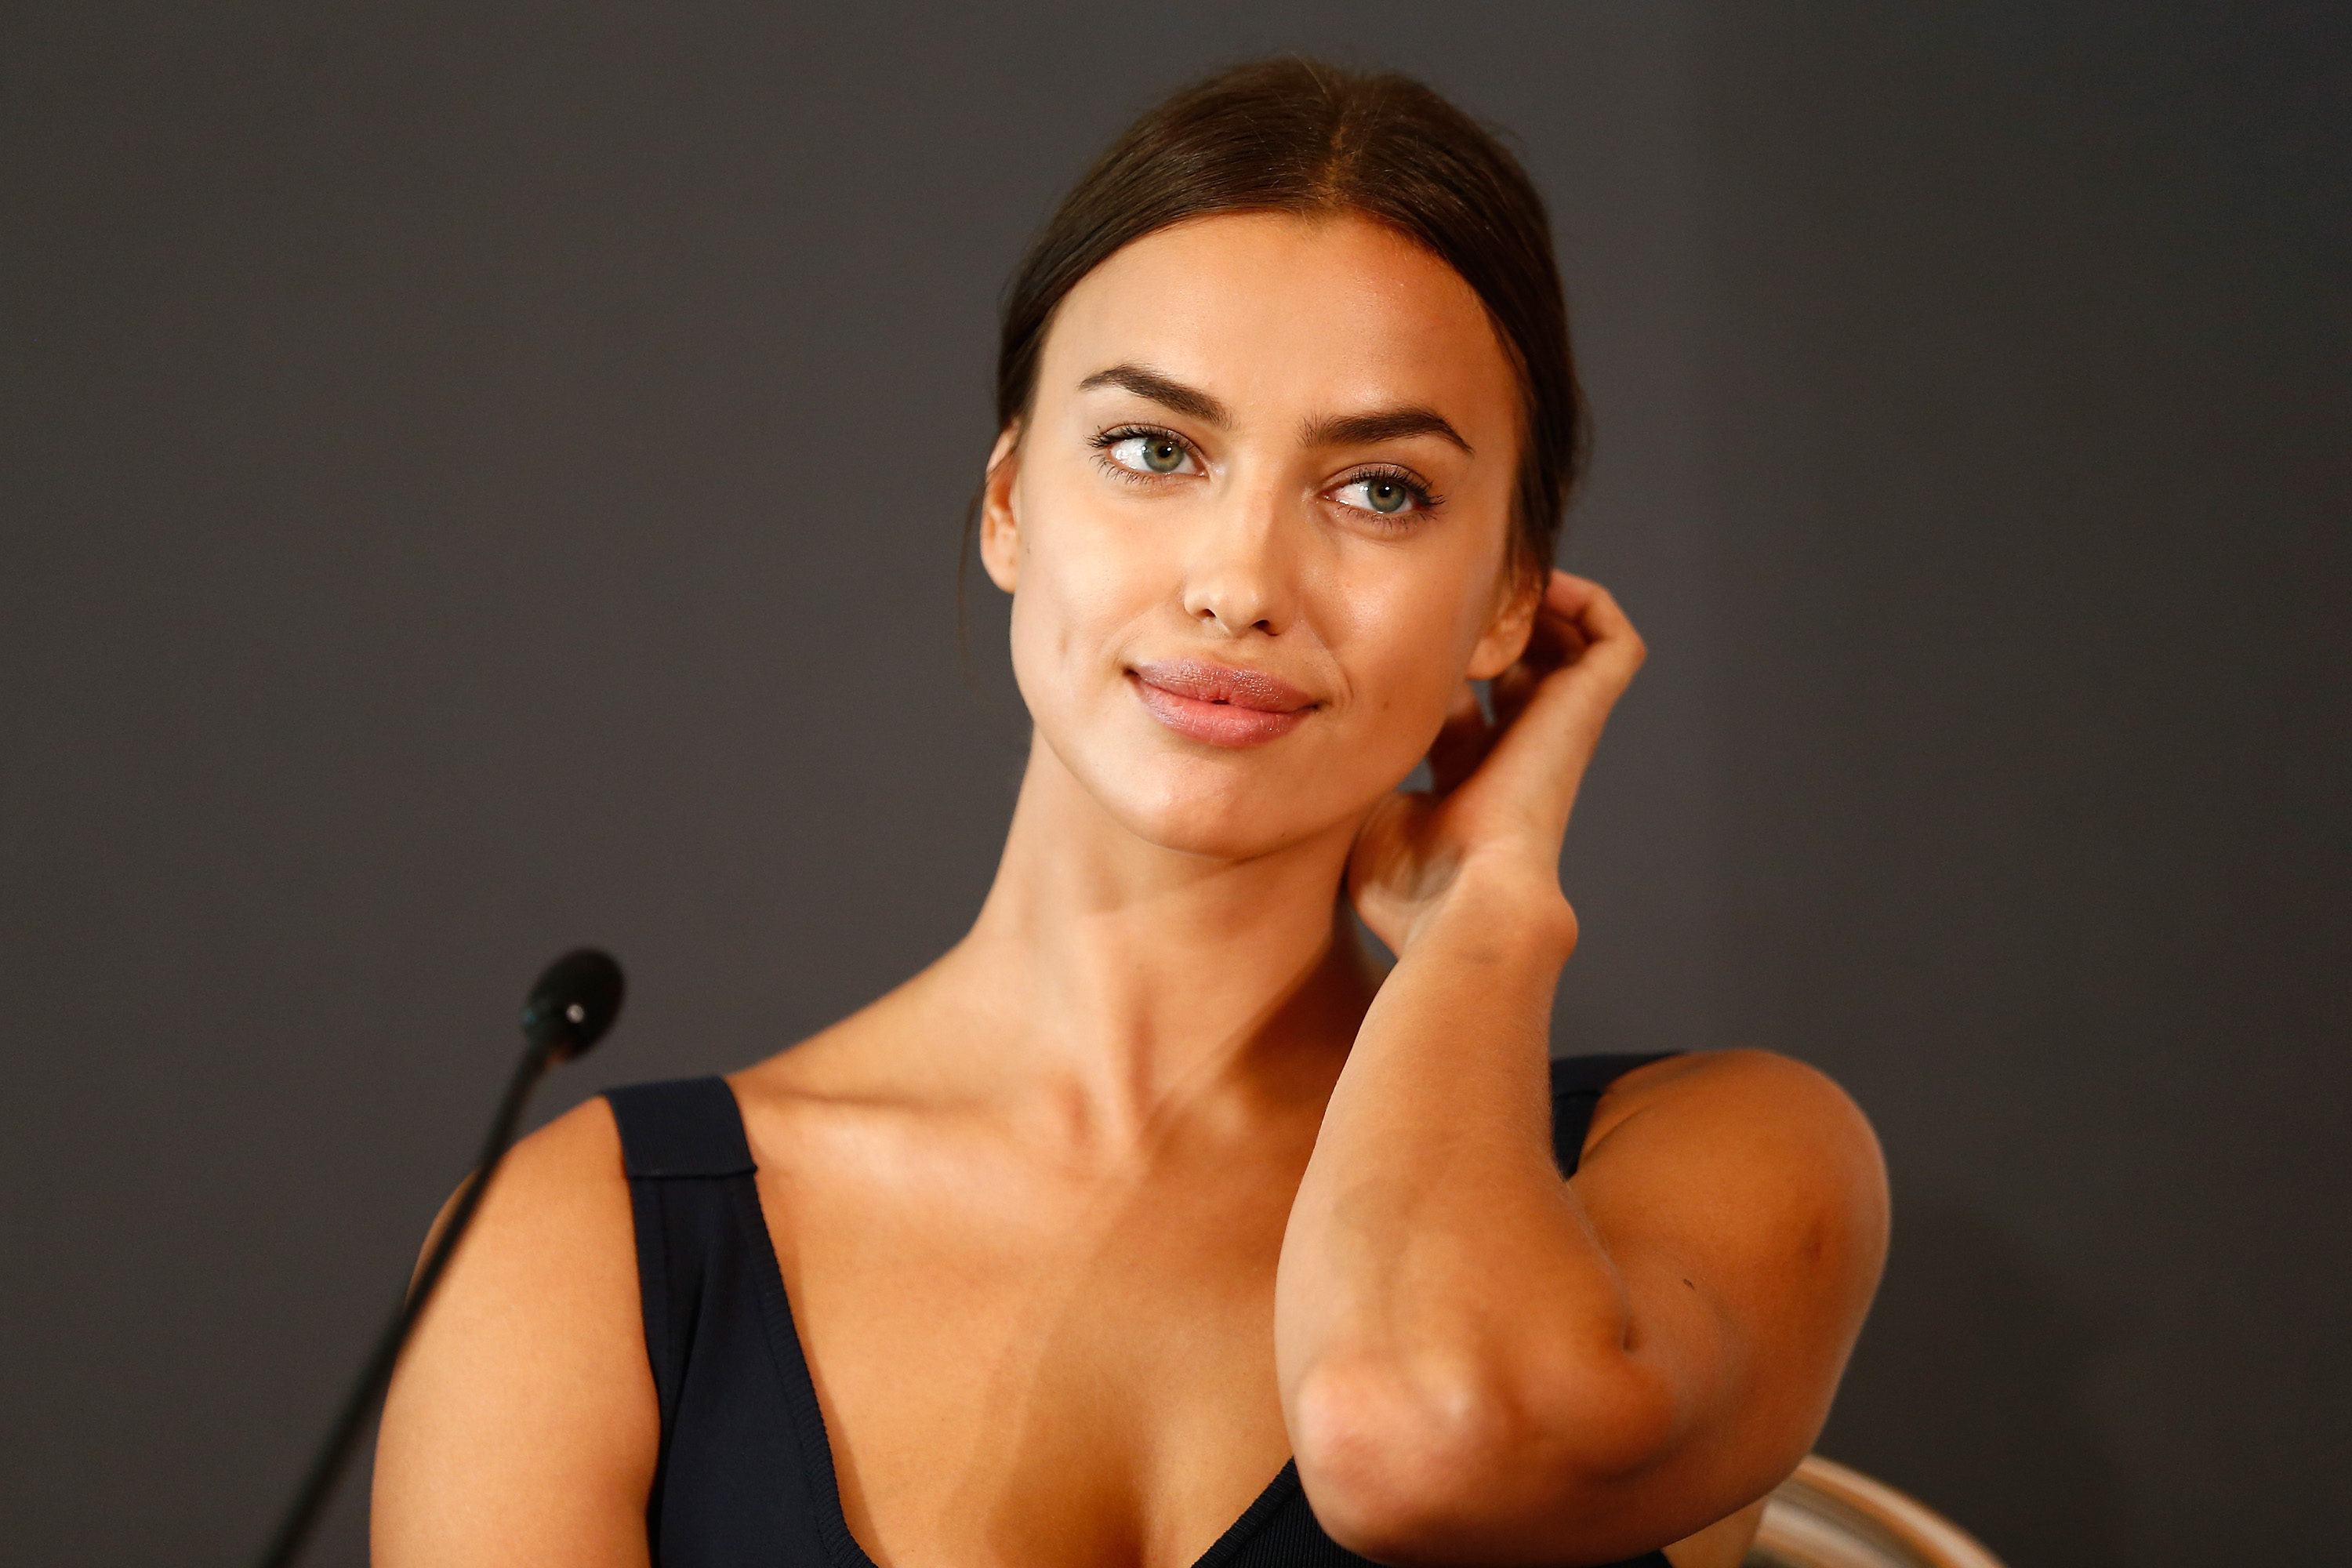 Irina Shayk at the press conference for "Hercules" in Berlin, 2014 | Source: Getty Images